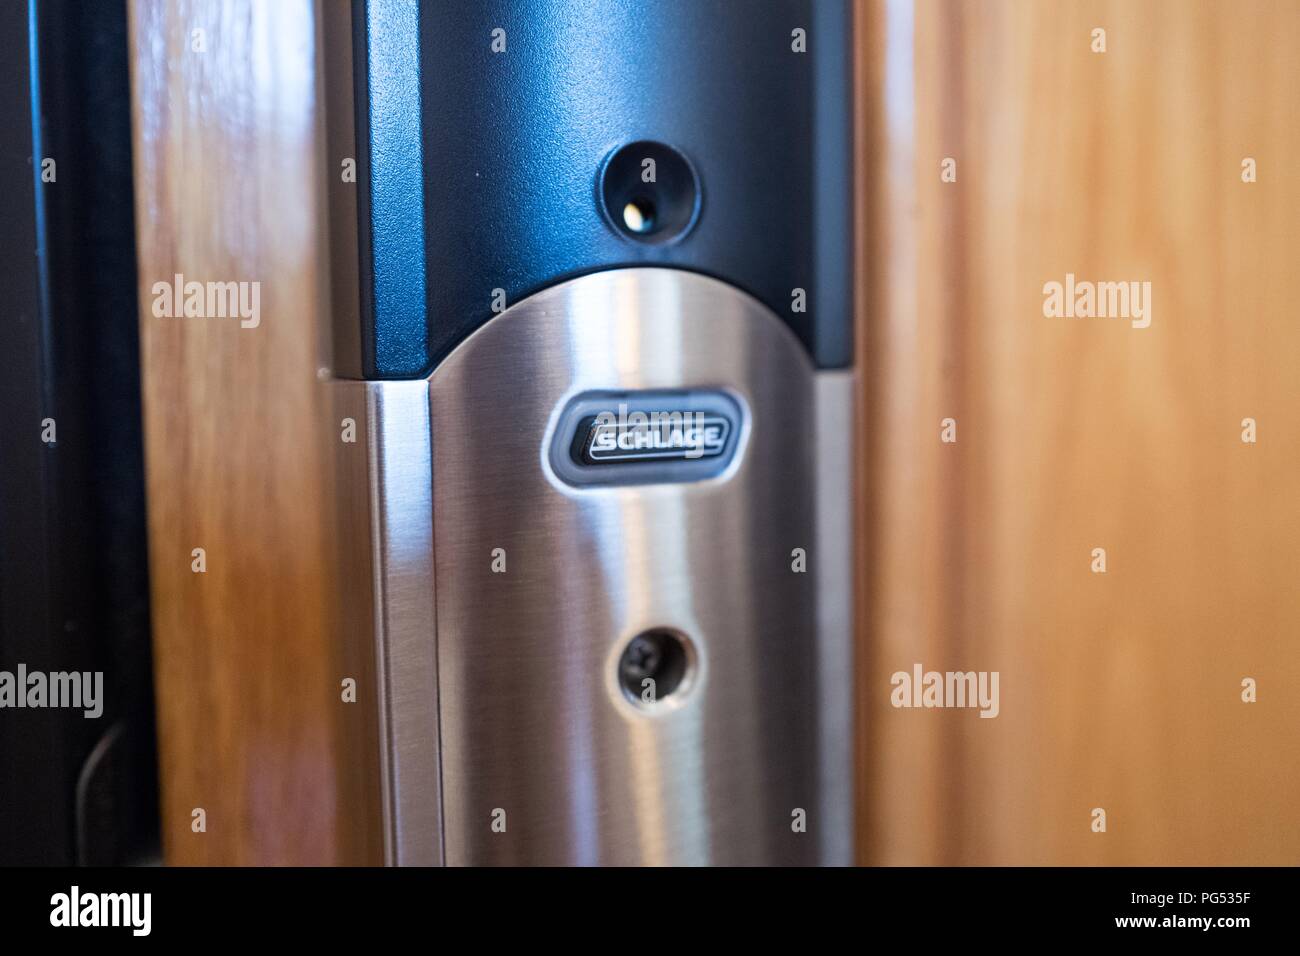 Close-up of Schlage Connect smart lock installed on the front door of a home, a smart home device which allows the door to be unlocked remotely from a smartphone app, May 7, 2018. () Stock Photo